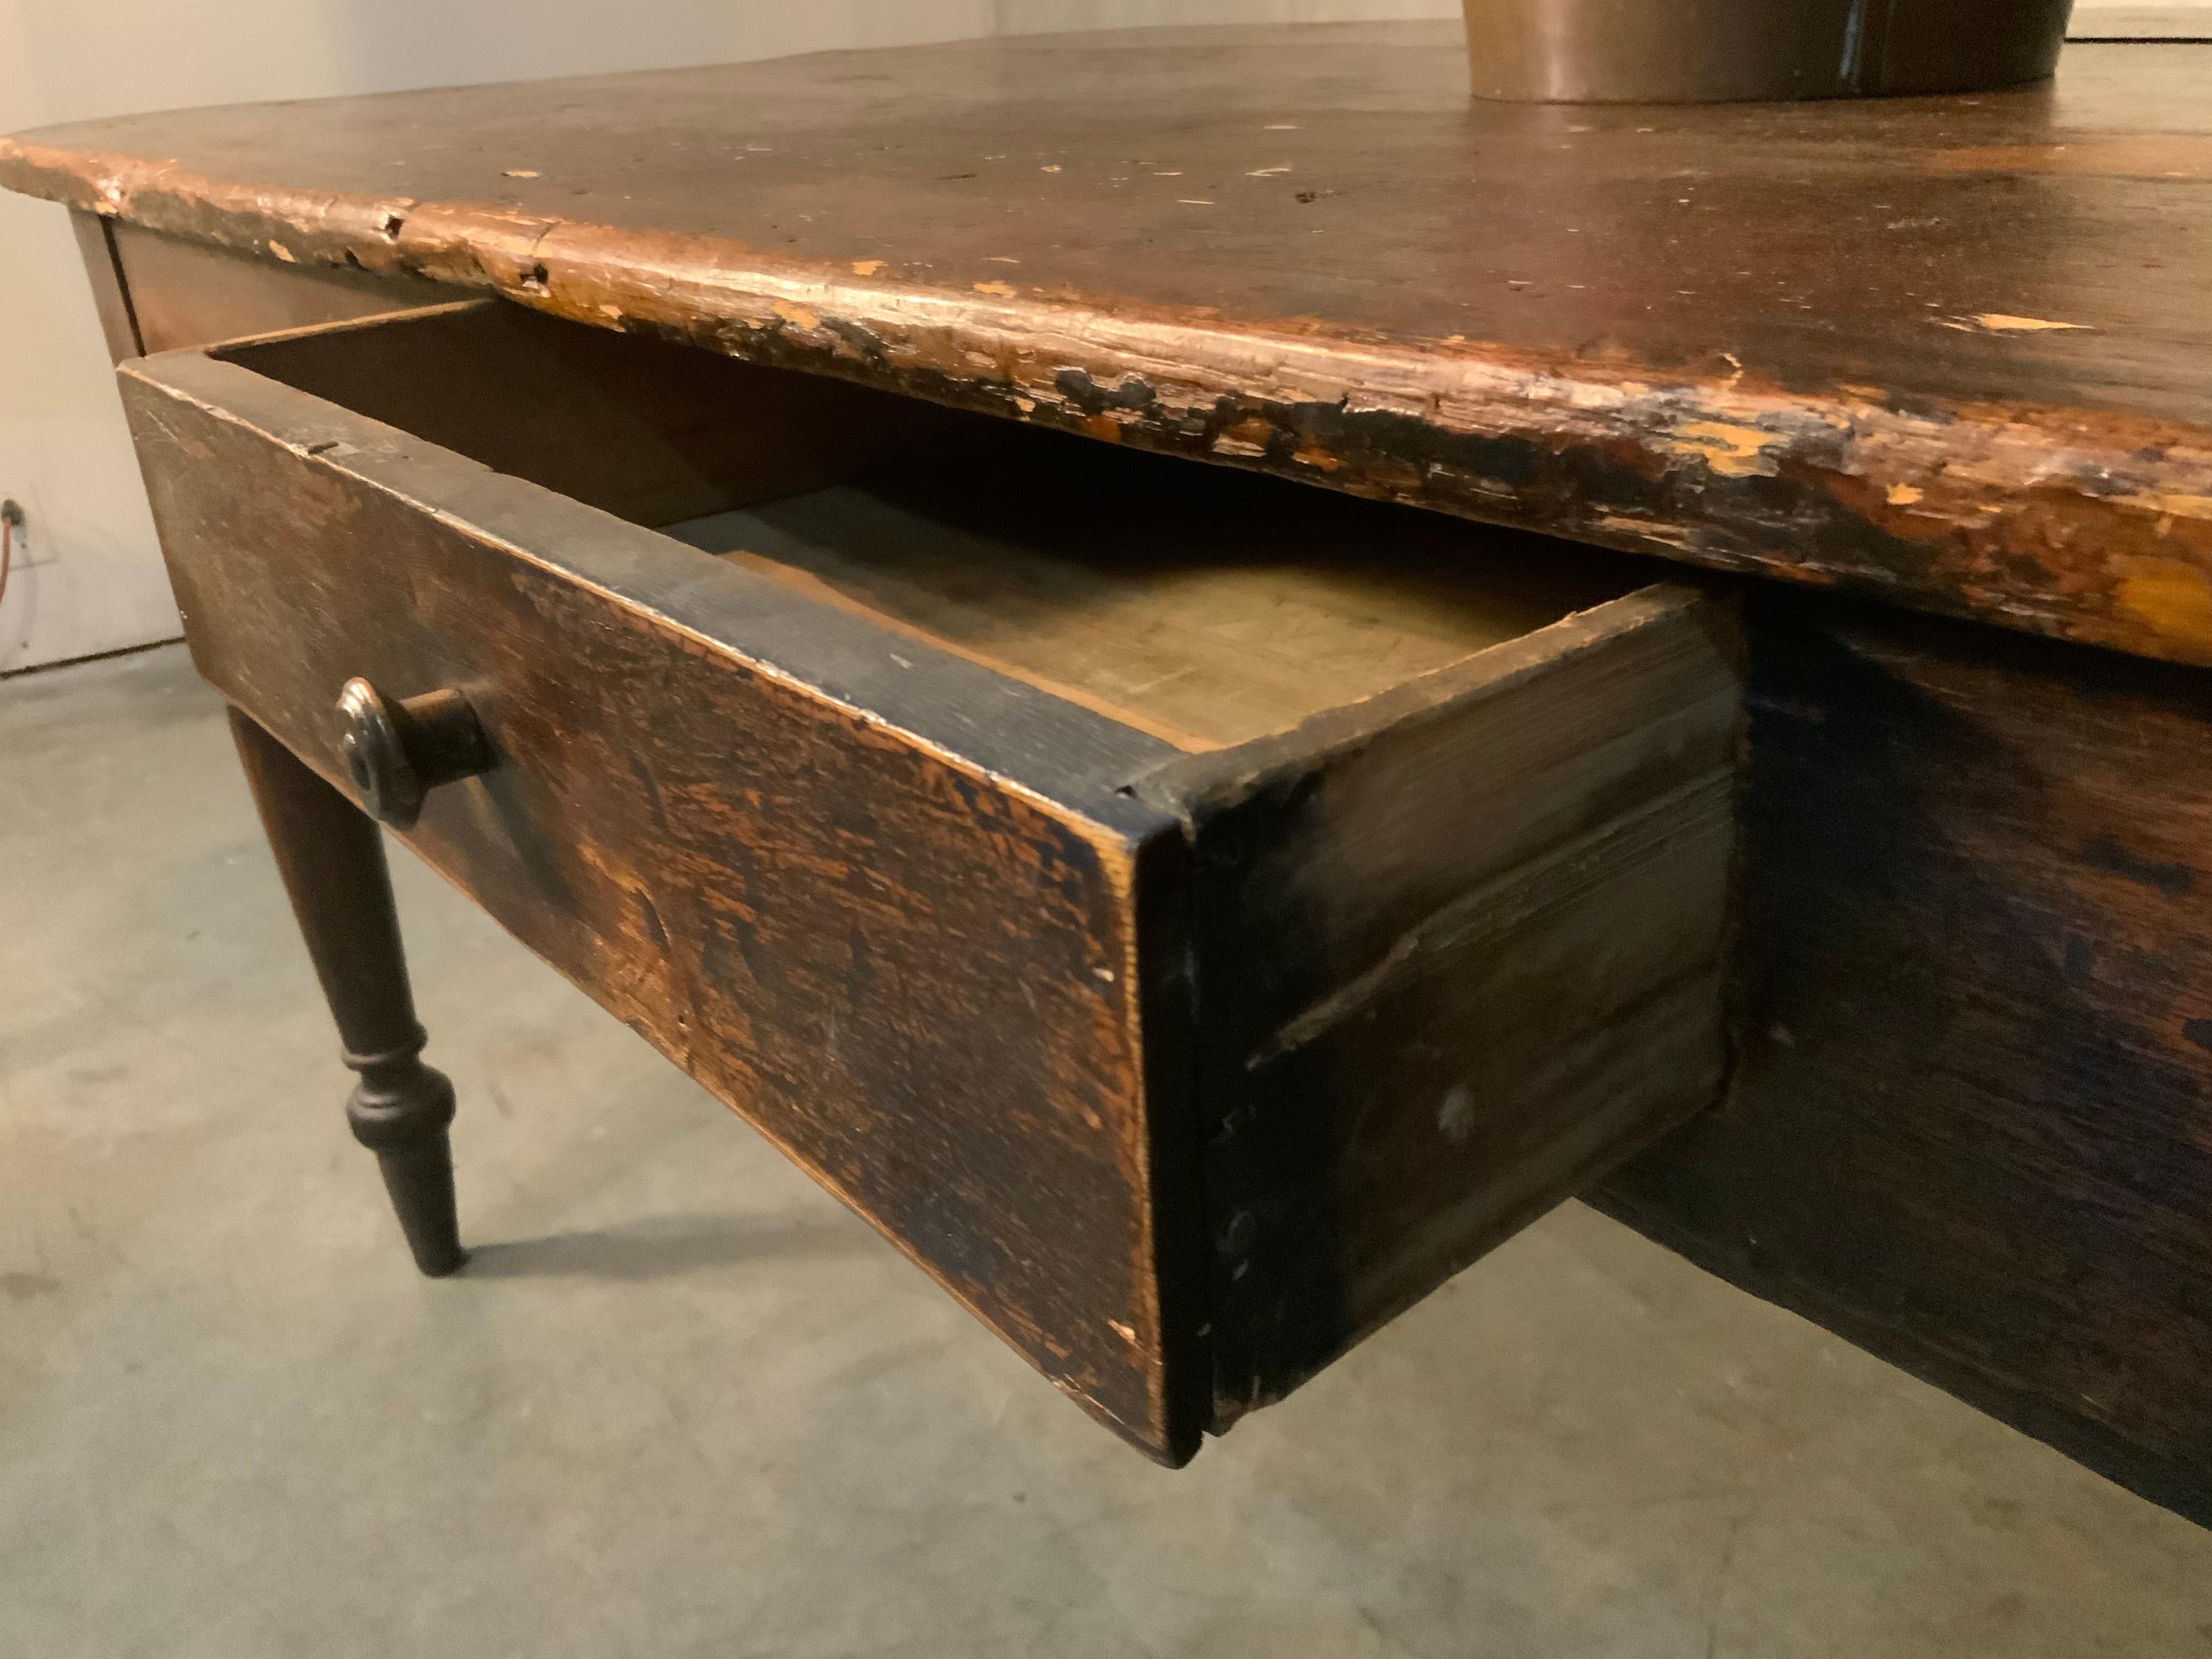 Hand-Crafted 1860 Pine Farm Table in Untouched Original Finish